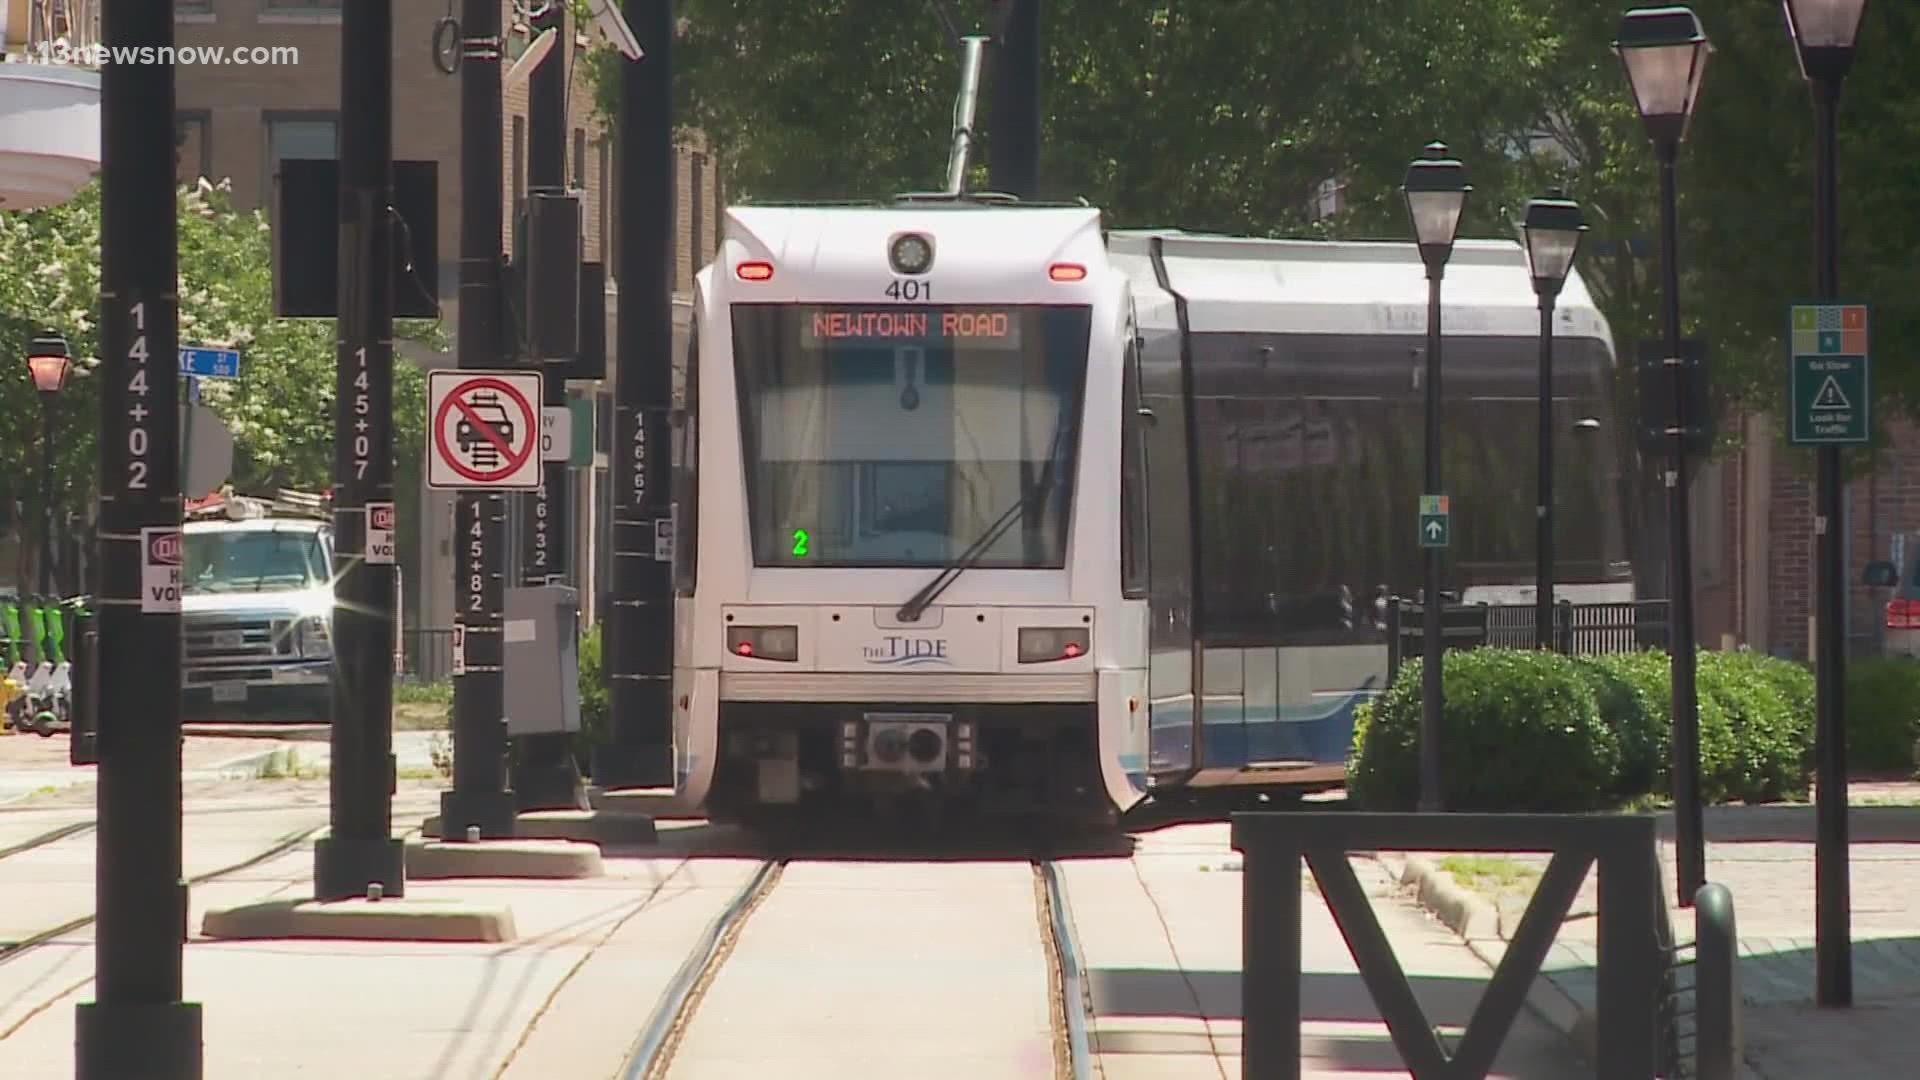 HRT reports more people have been taking the local light rail, The Tide, because it's cheaper than paying for gas.